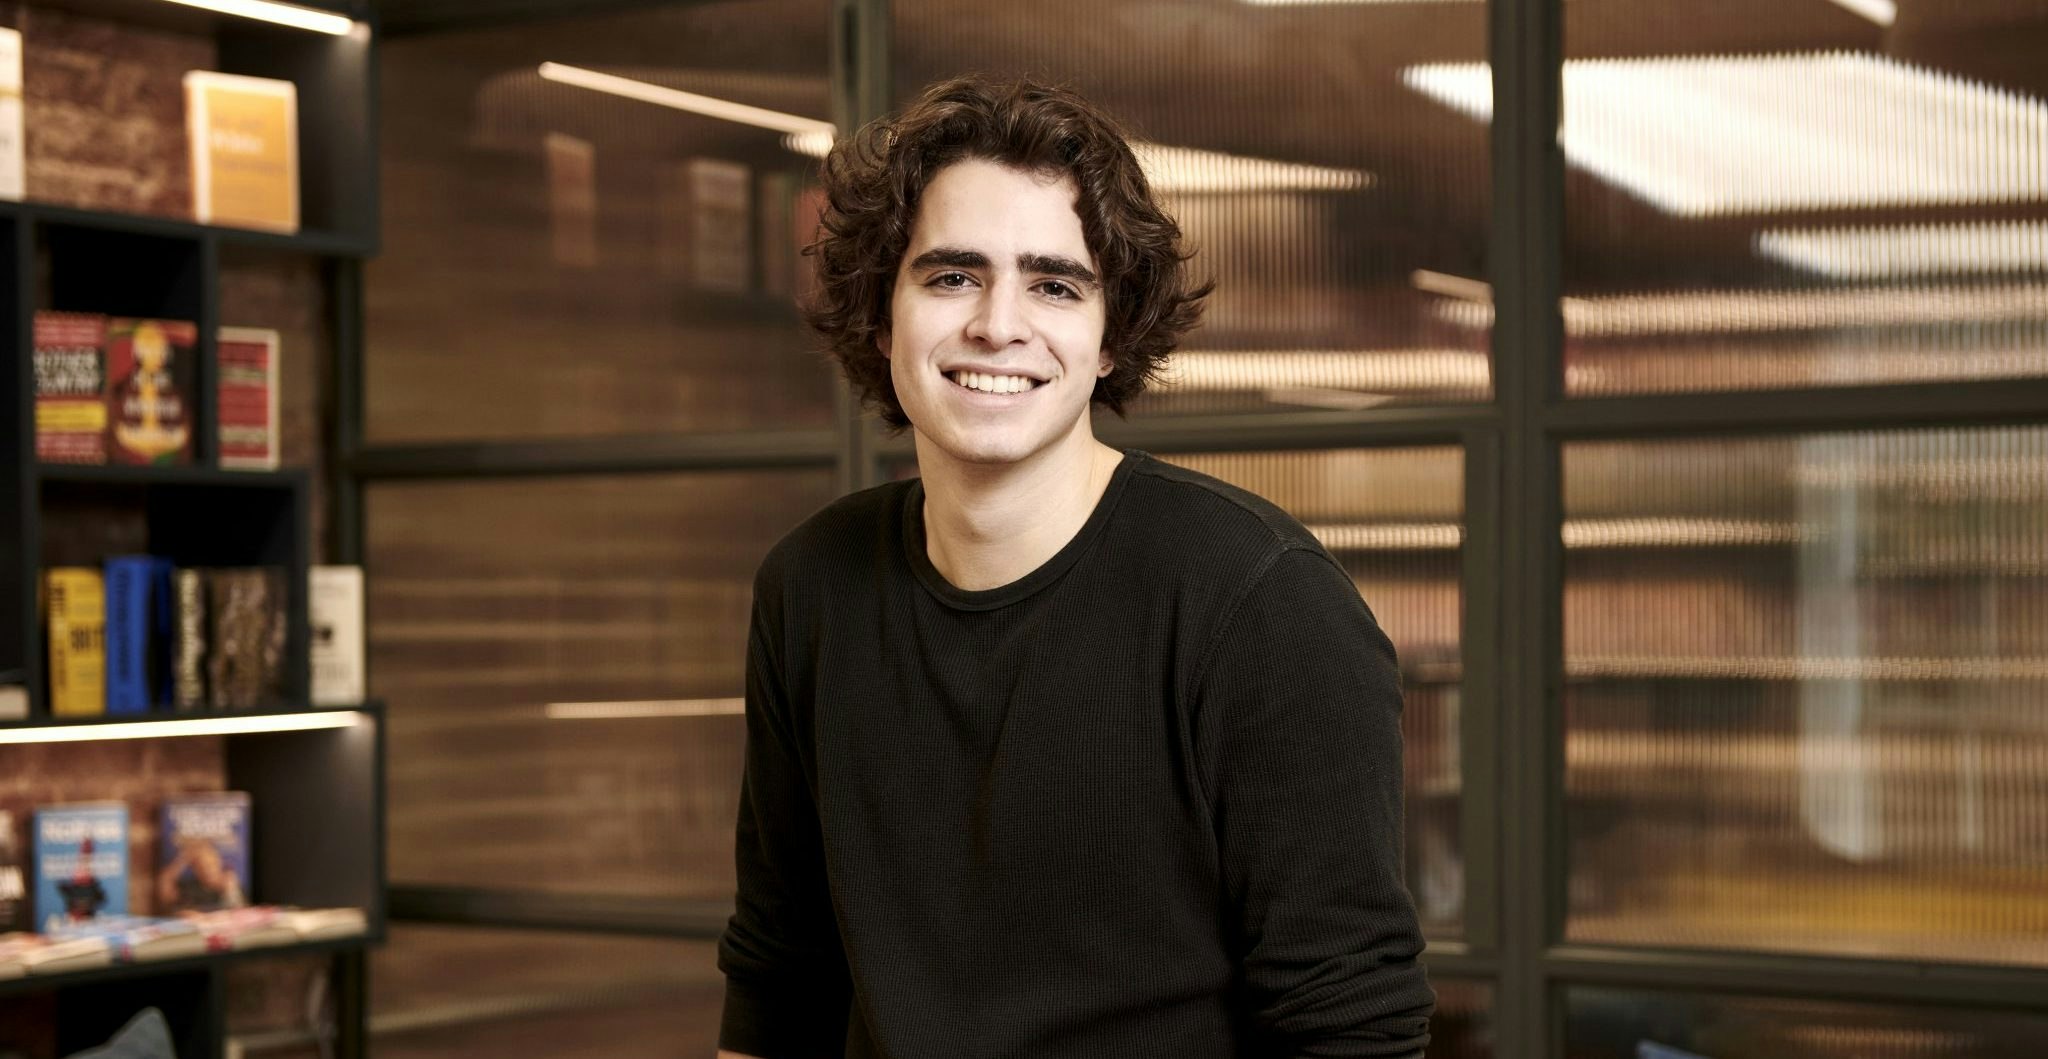 An image of Michelangelo Valtancoli, seed investor at Stride VC